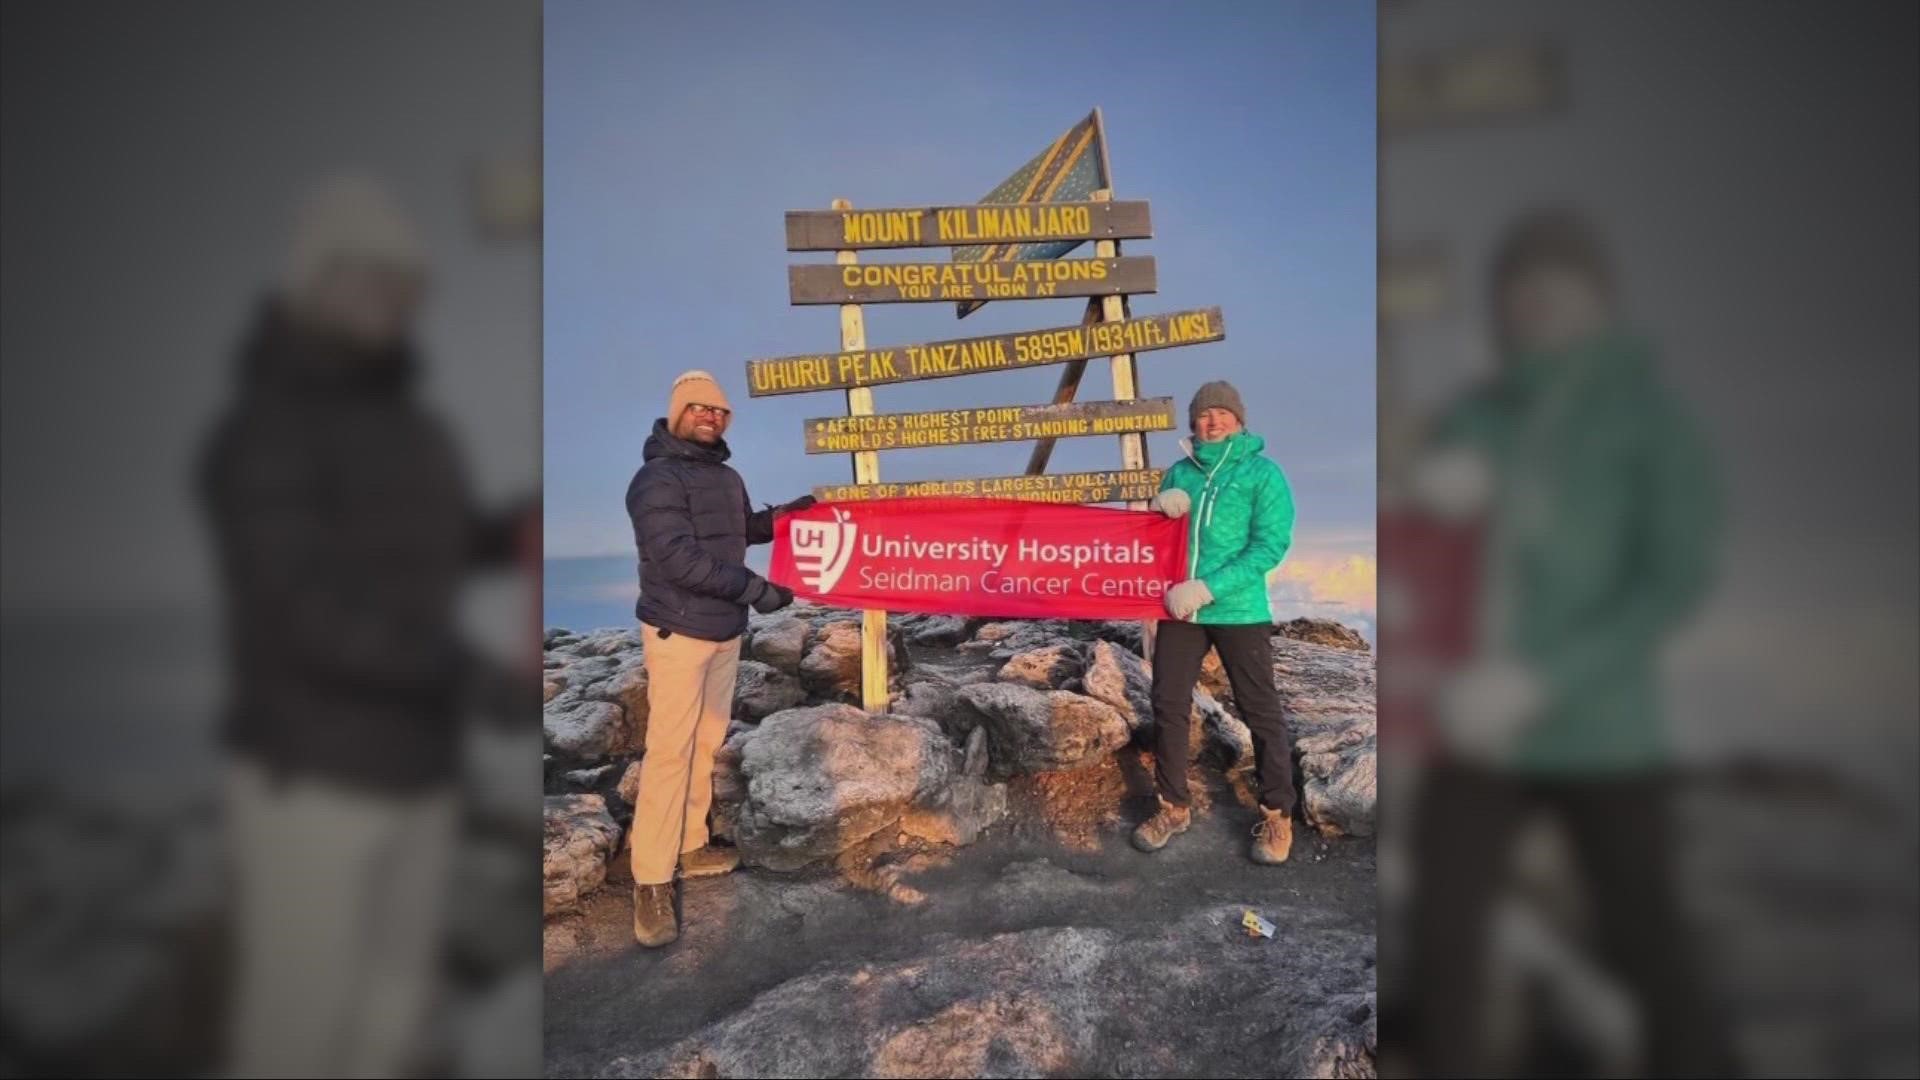 Senior health correspondent Monica Robins has the story of a local doctor and nurse practitioner who took their love of climbing to new heights.